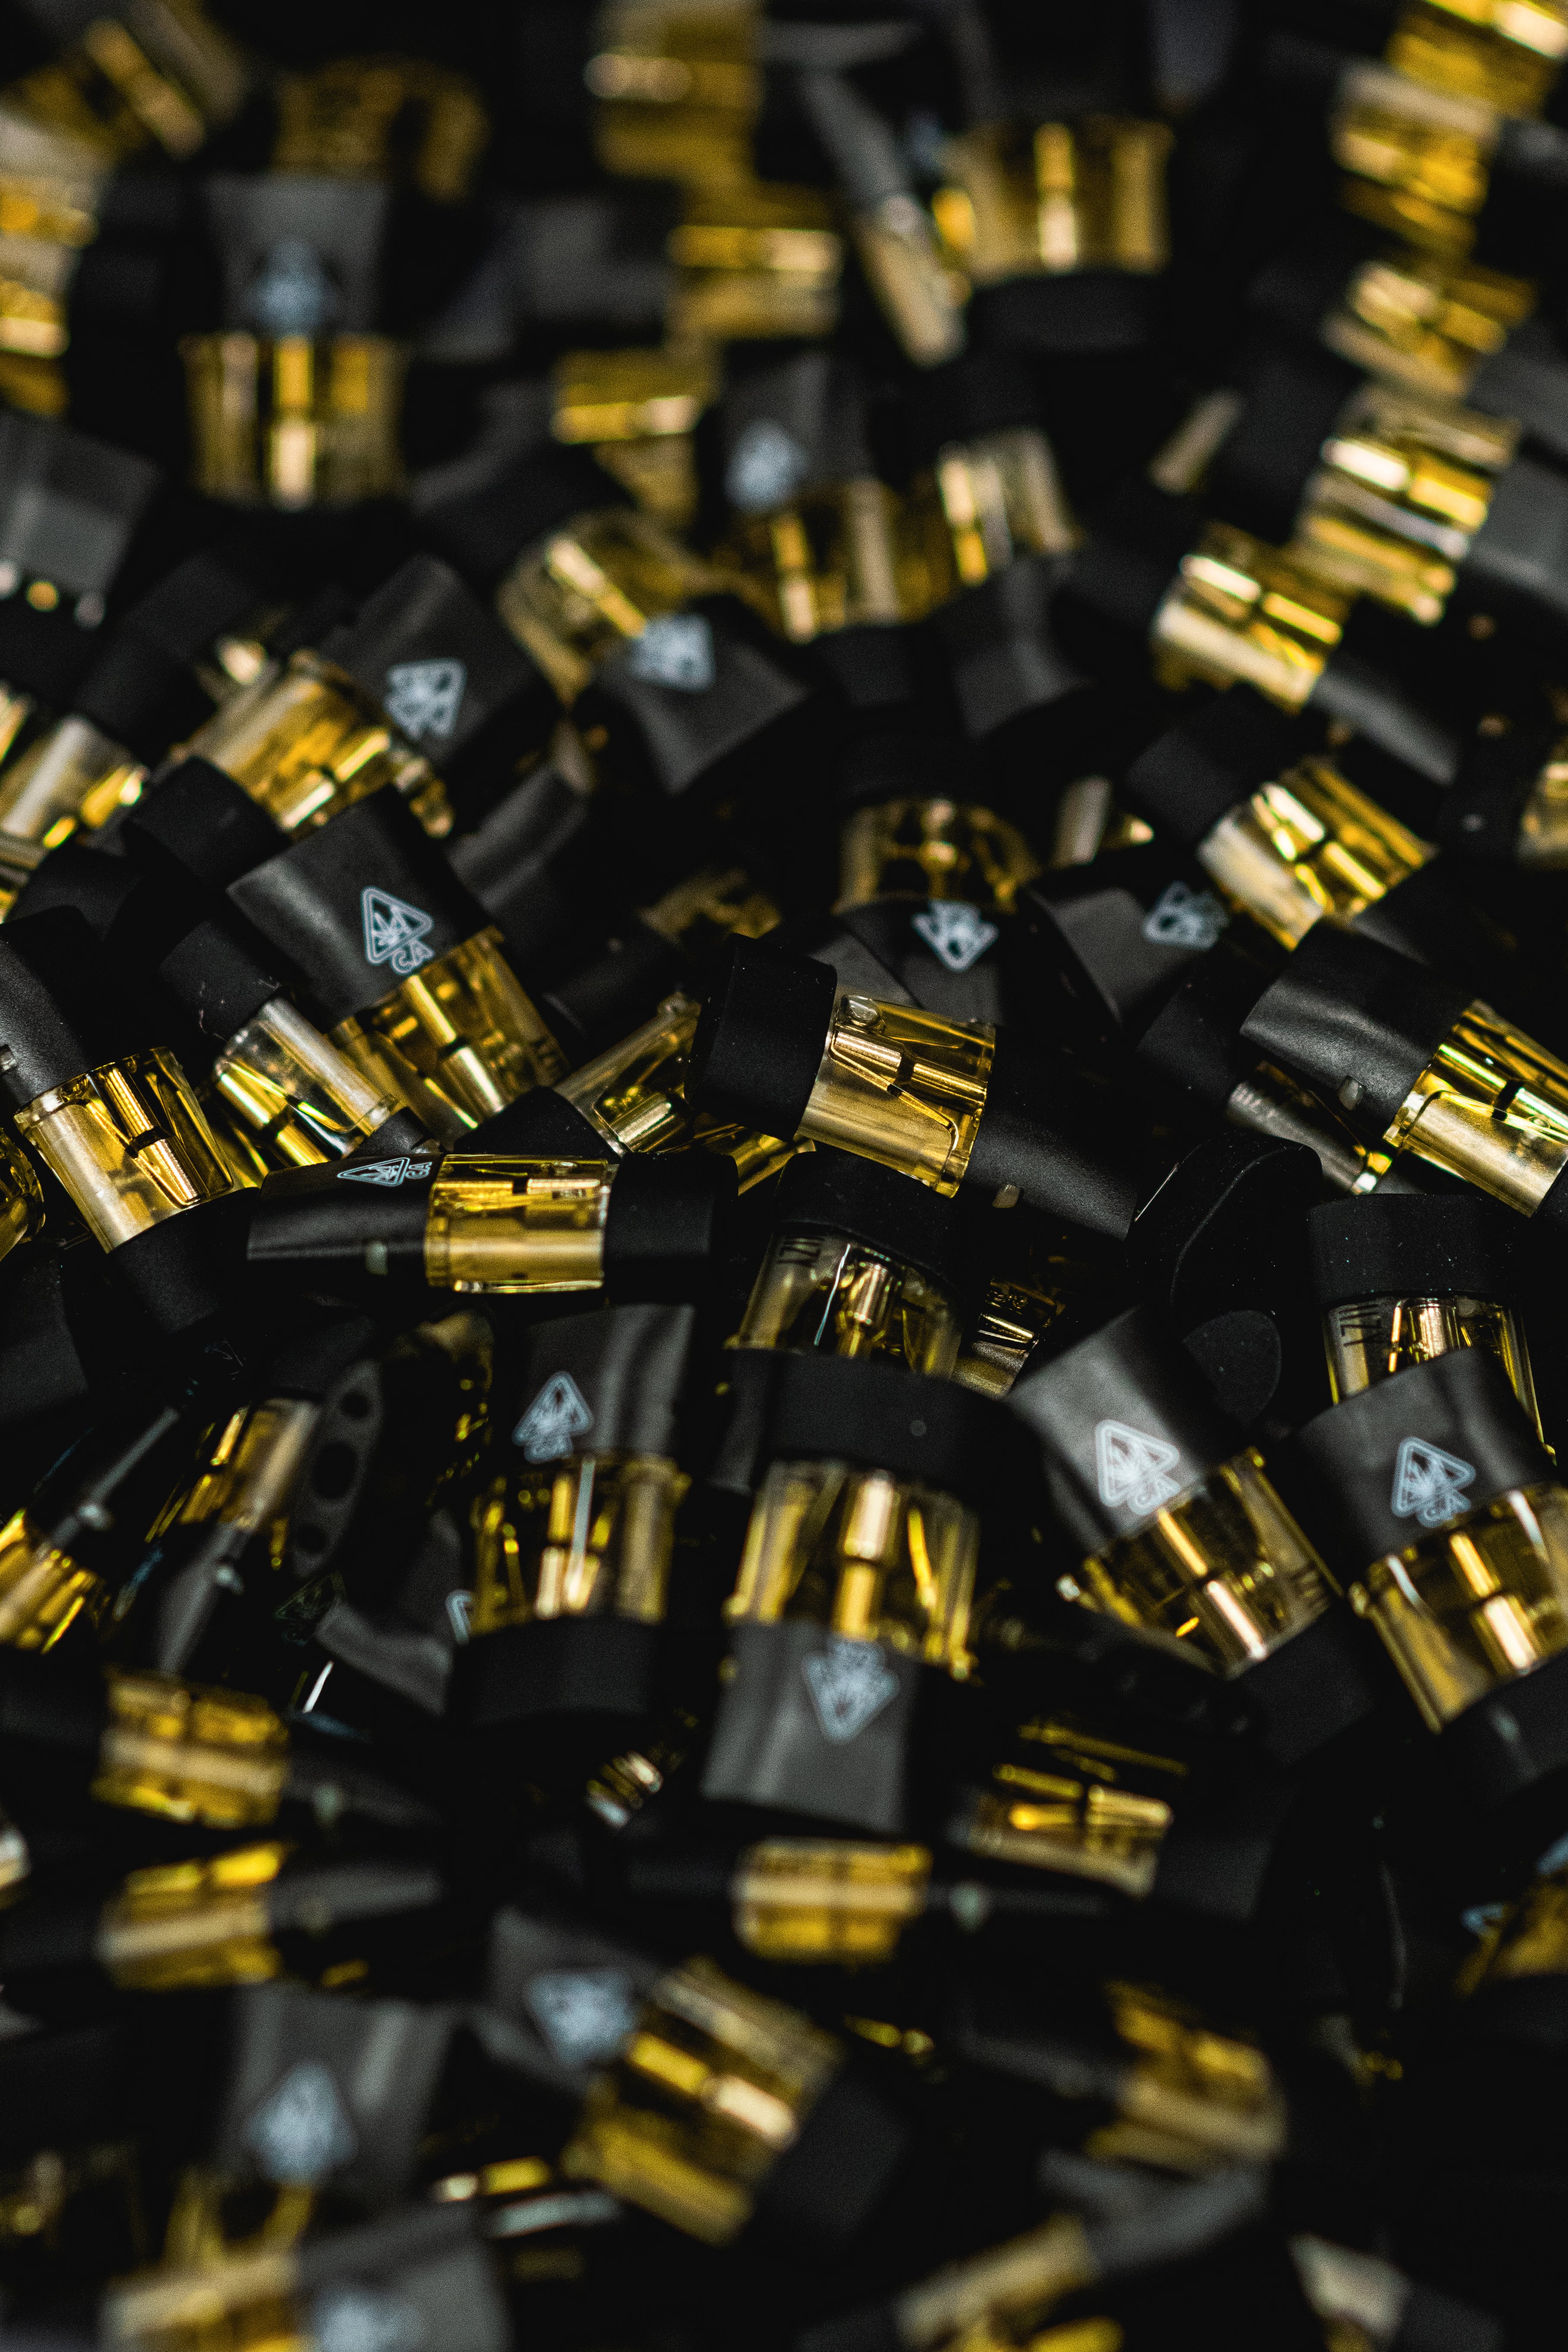 A large pool of black-capped weed vape pods with distillate are being showcased.